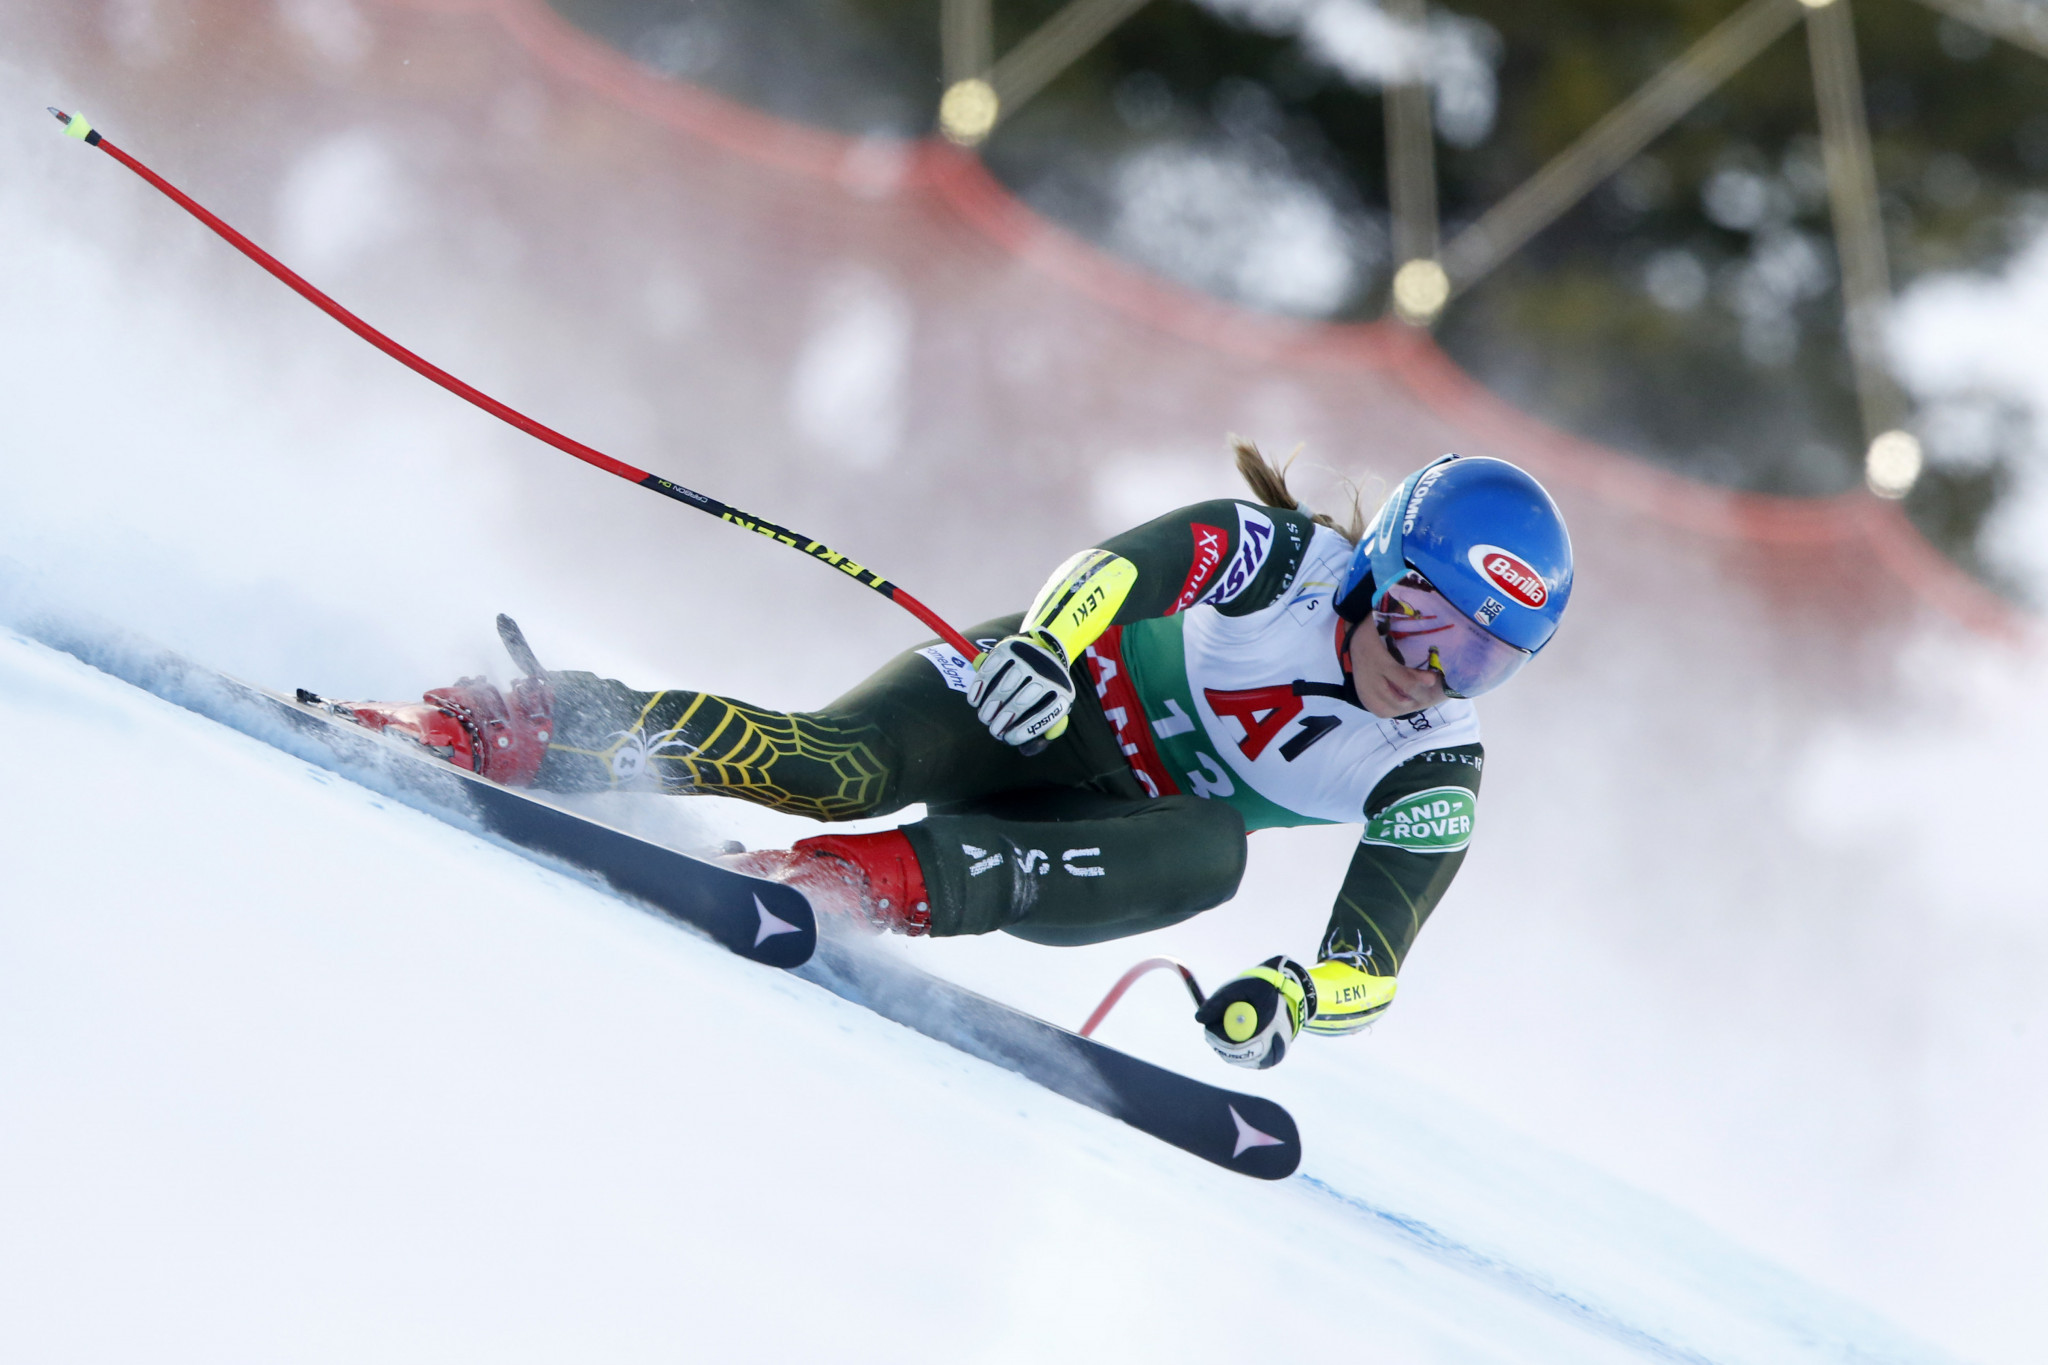 Shiffrin earns third consecutive athlete of the month award